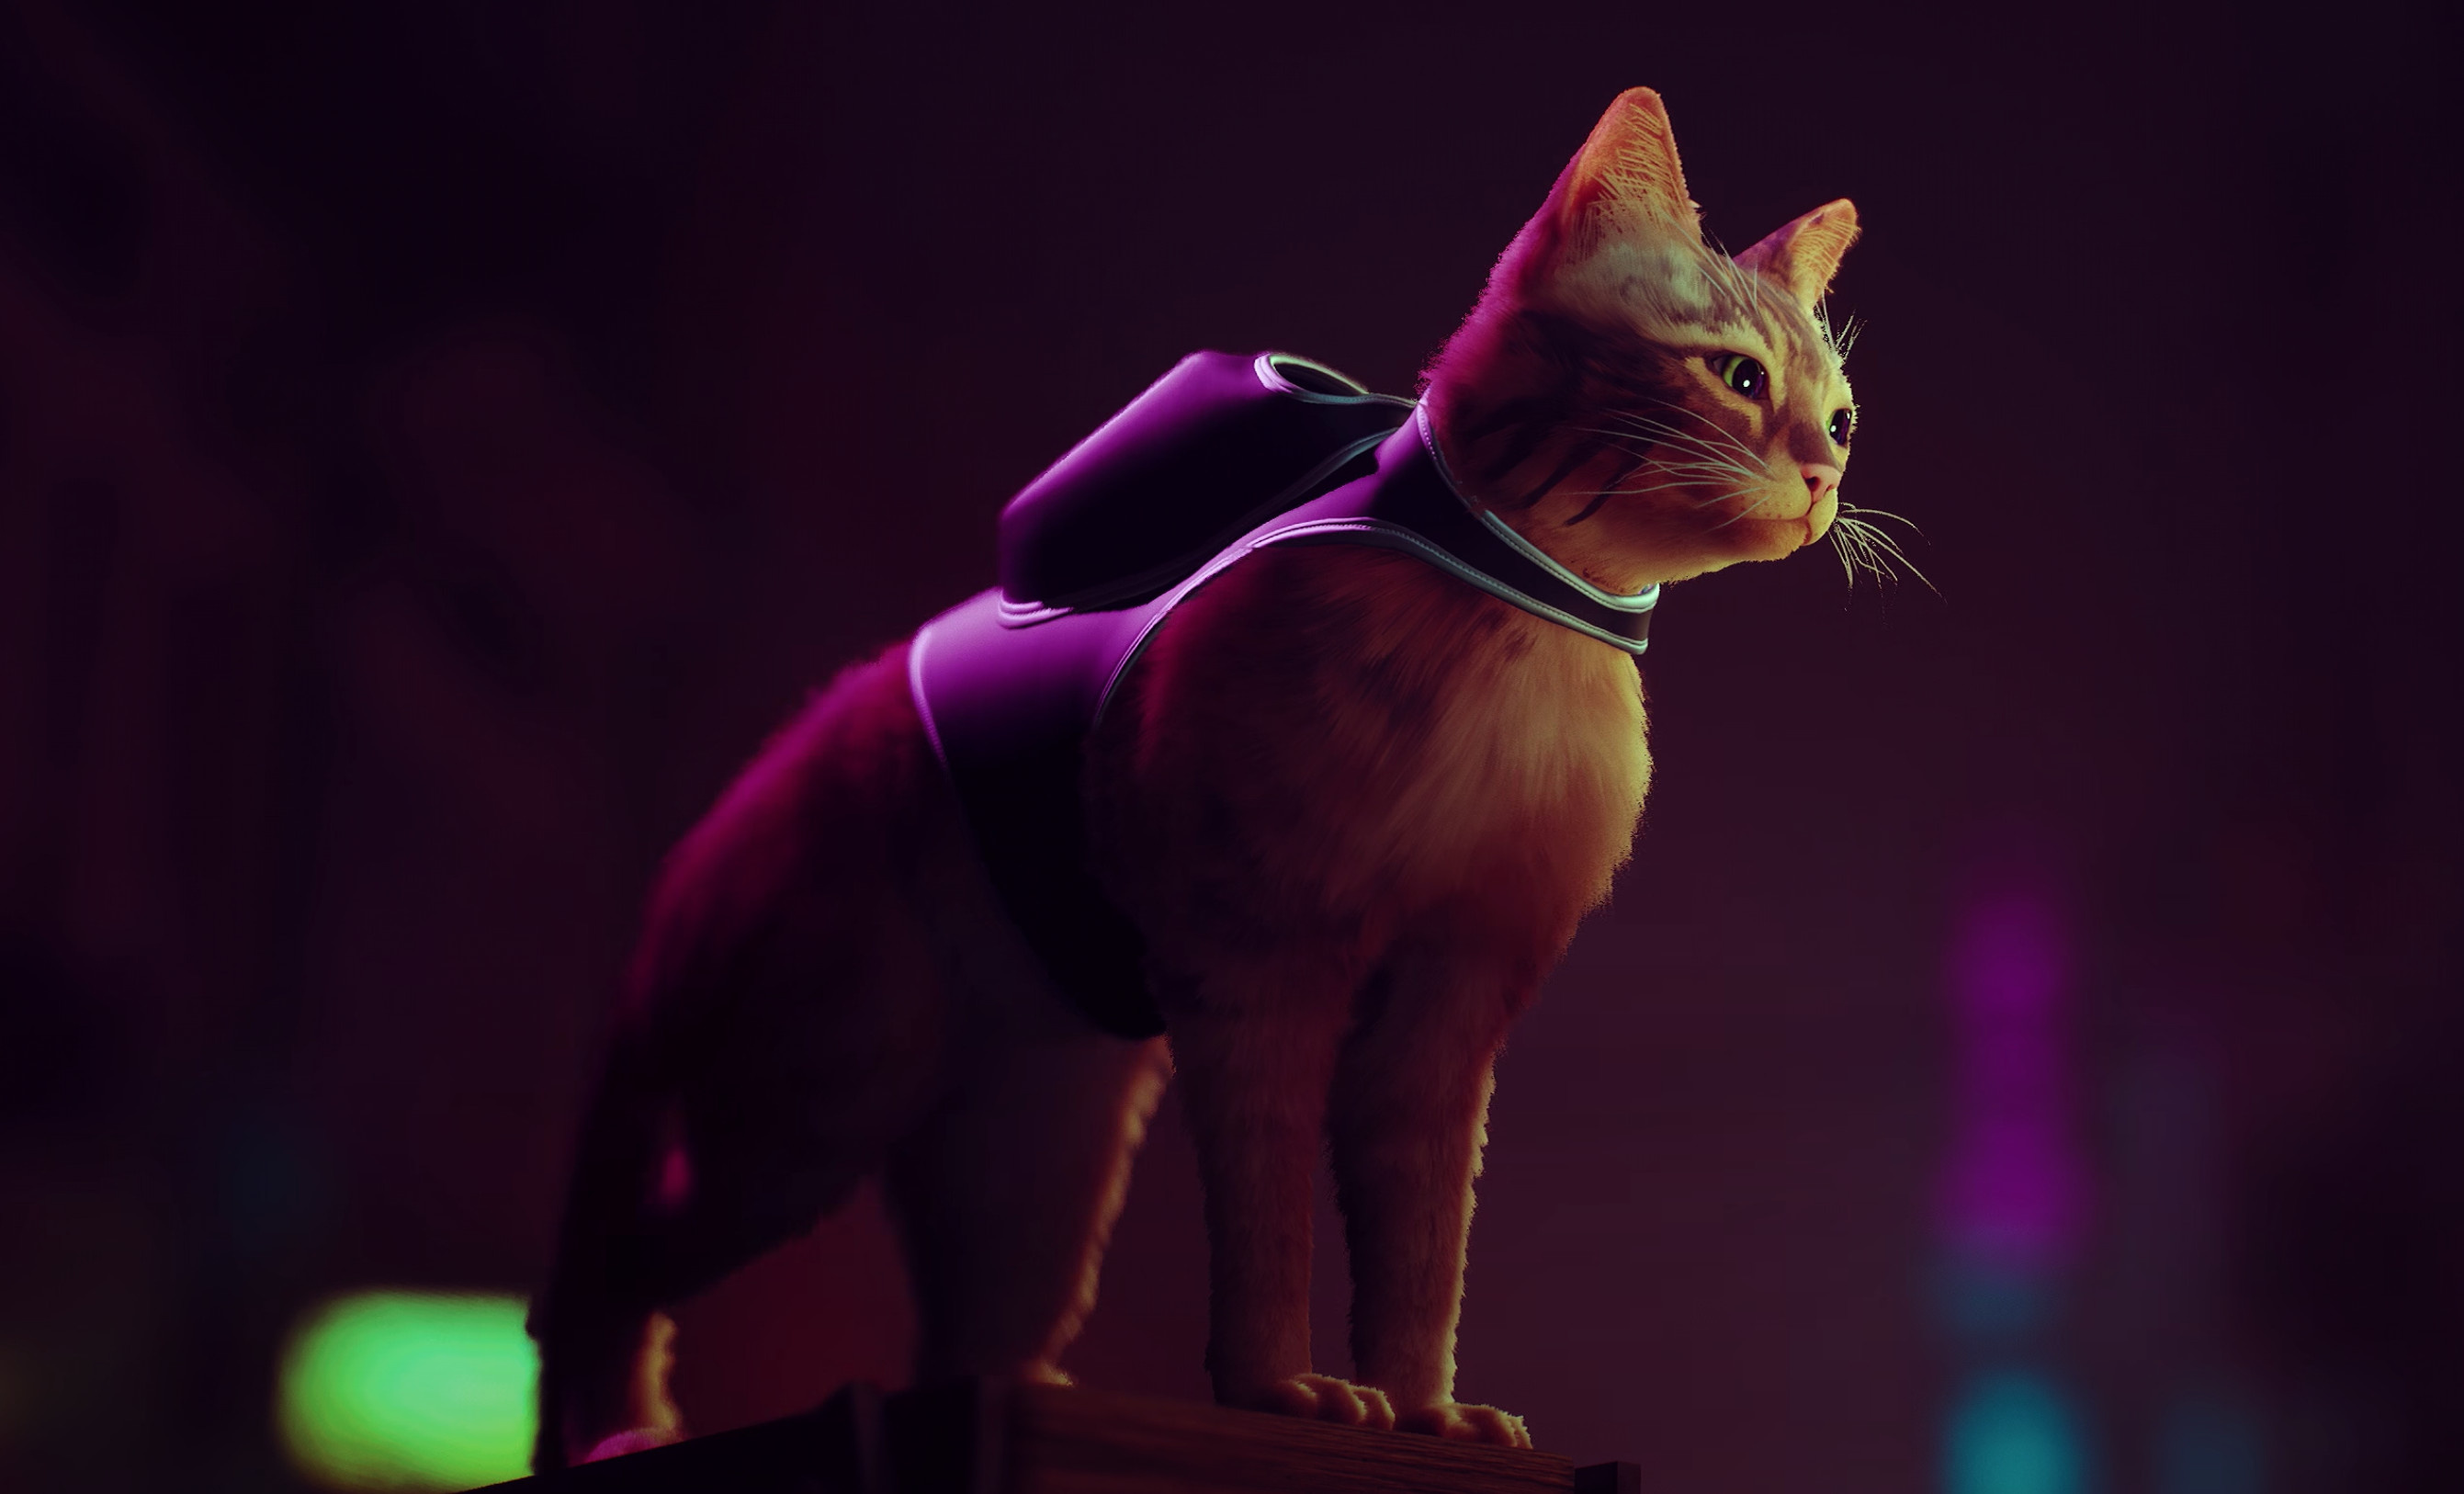 Stray (Game): Game character, A slim orange, striped cat, A stray in a neon-lit, underground city. 2690x1630 HD Wallpaper.